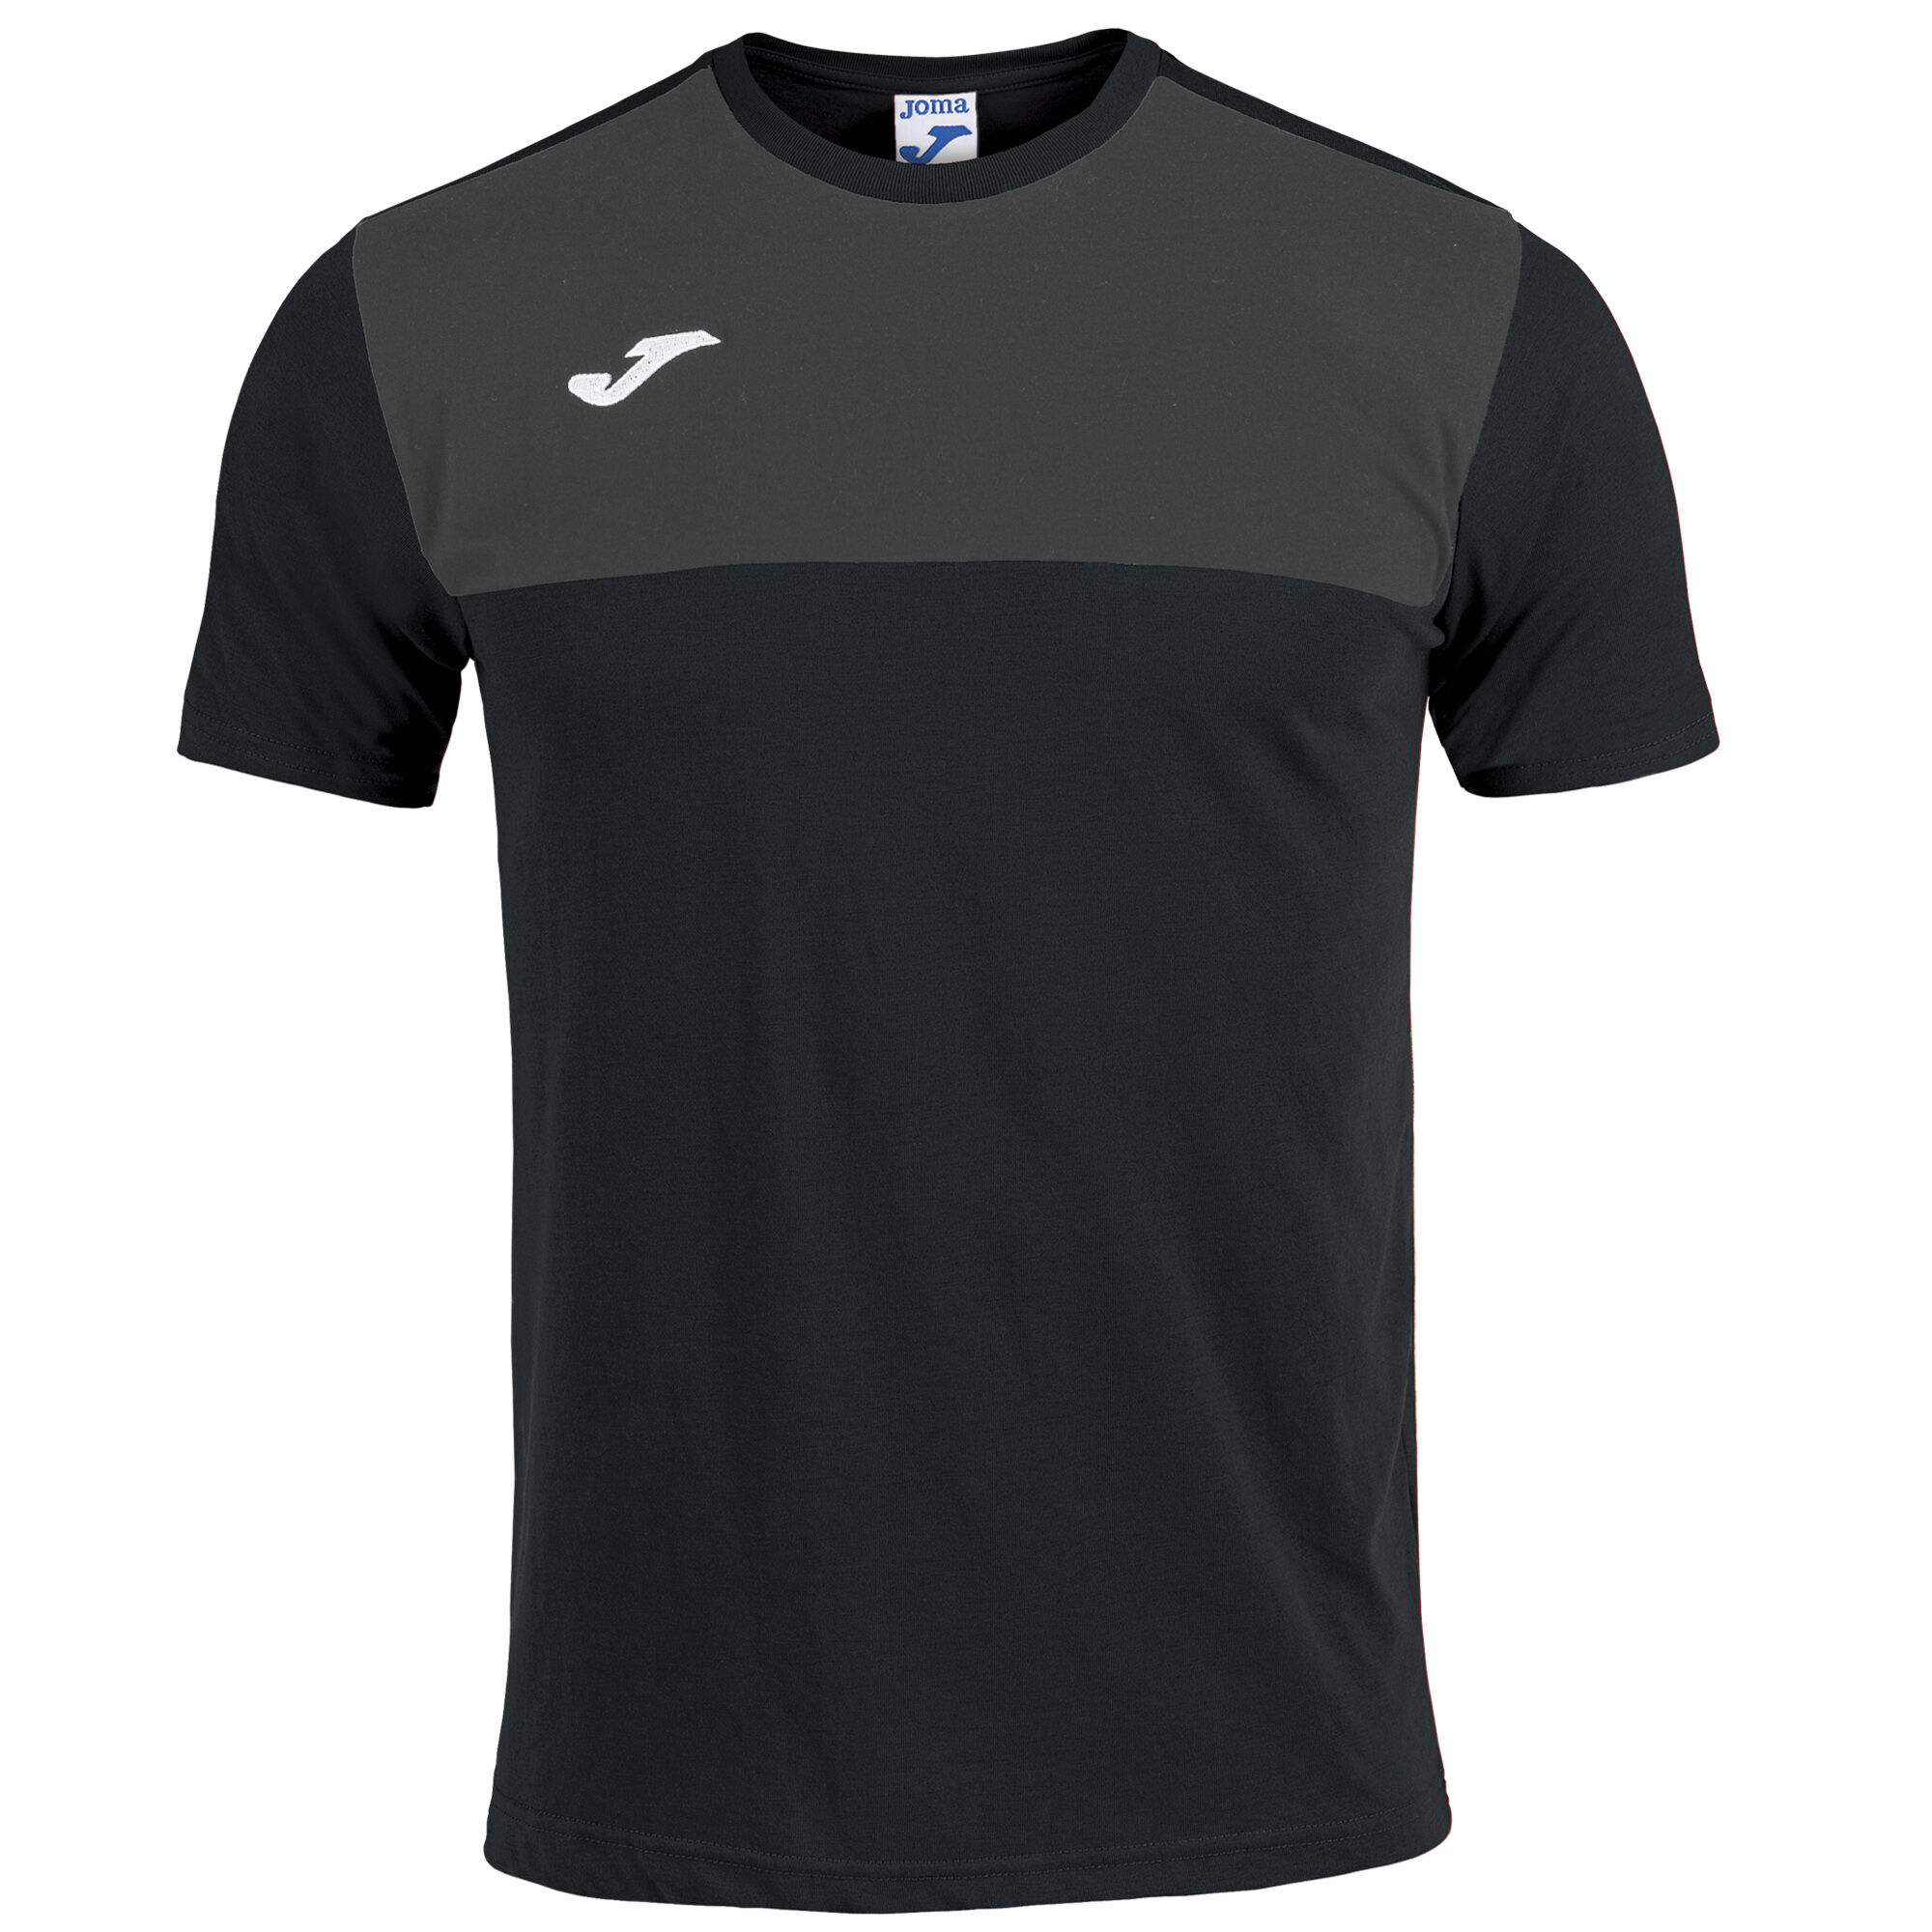 Maillot manches courtes homme Winner noir anthracite